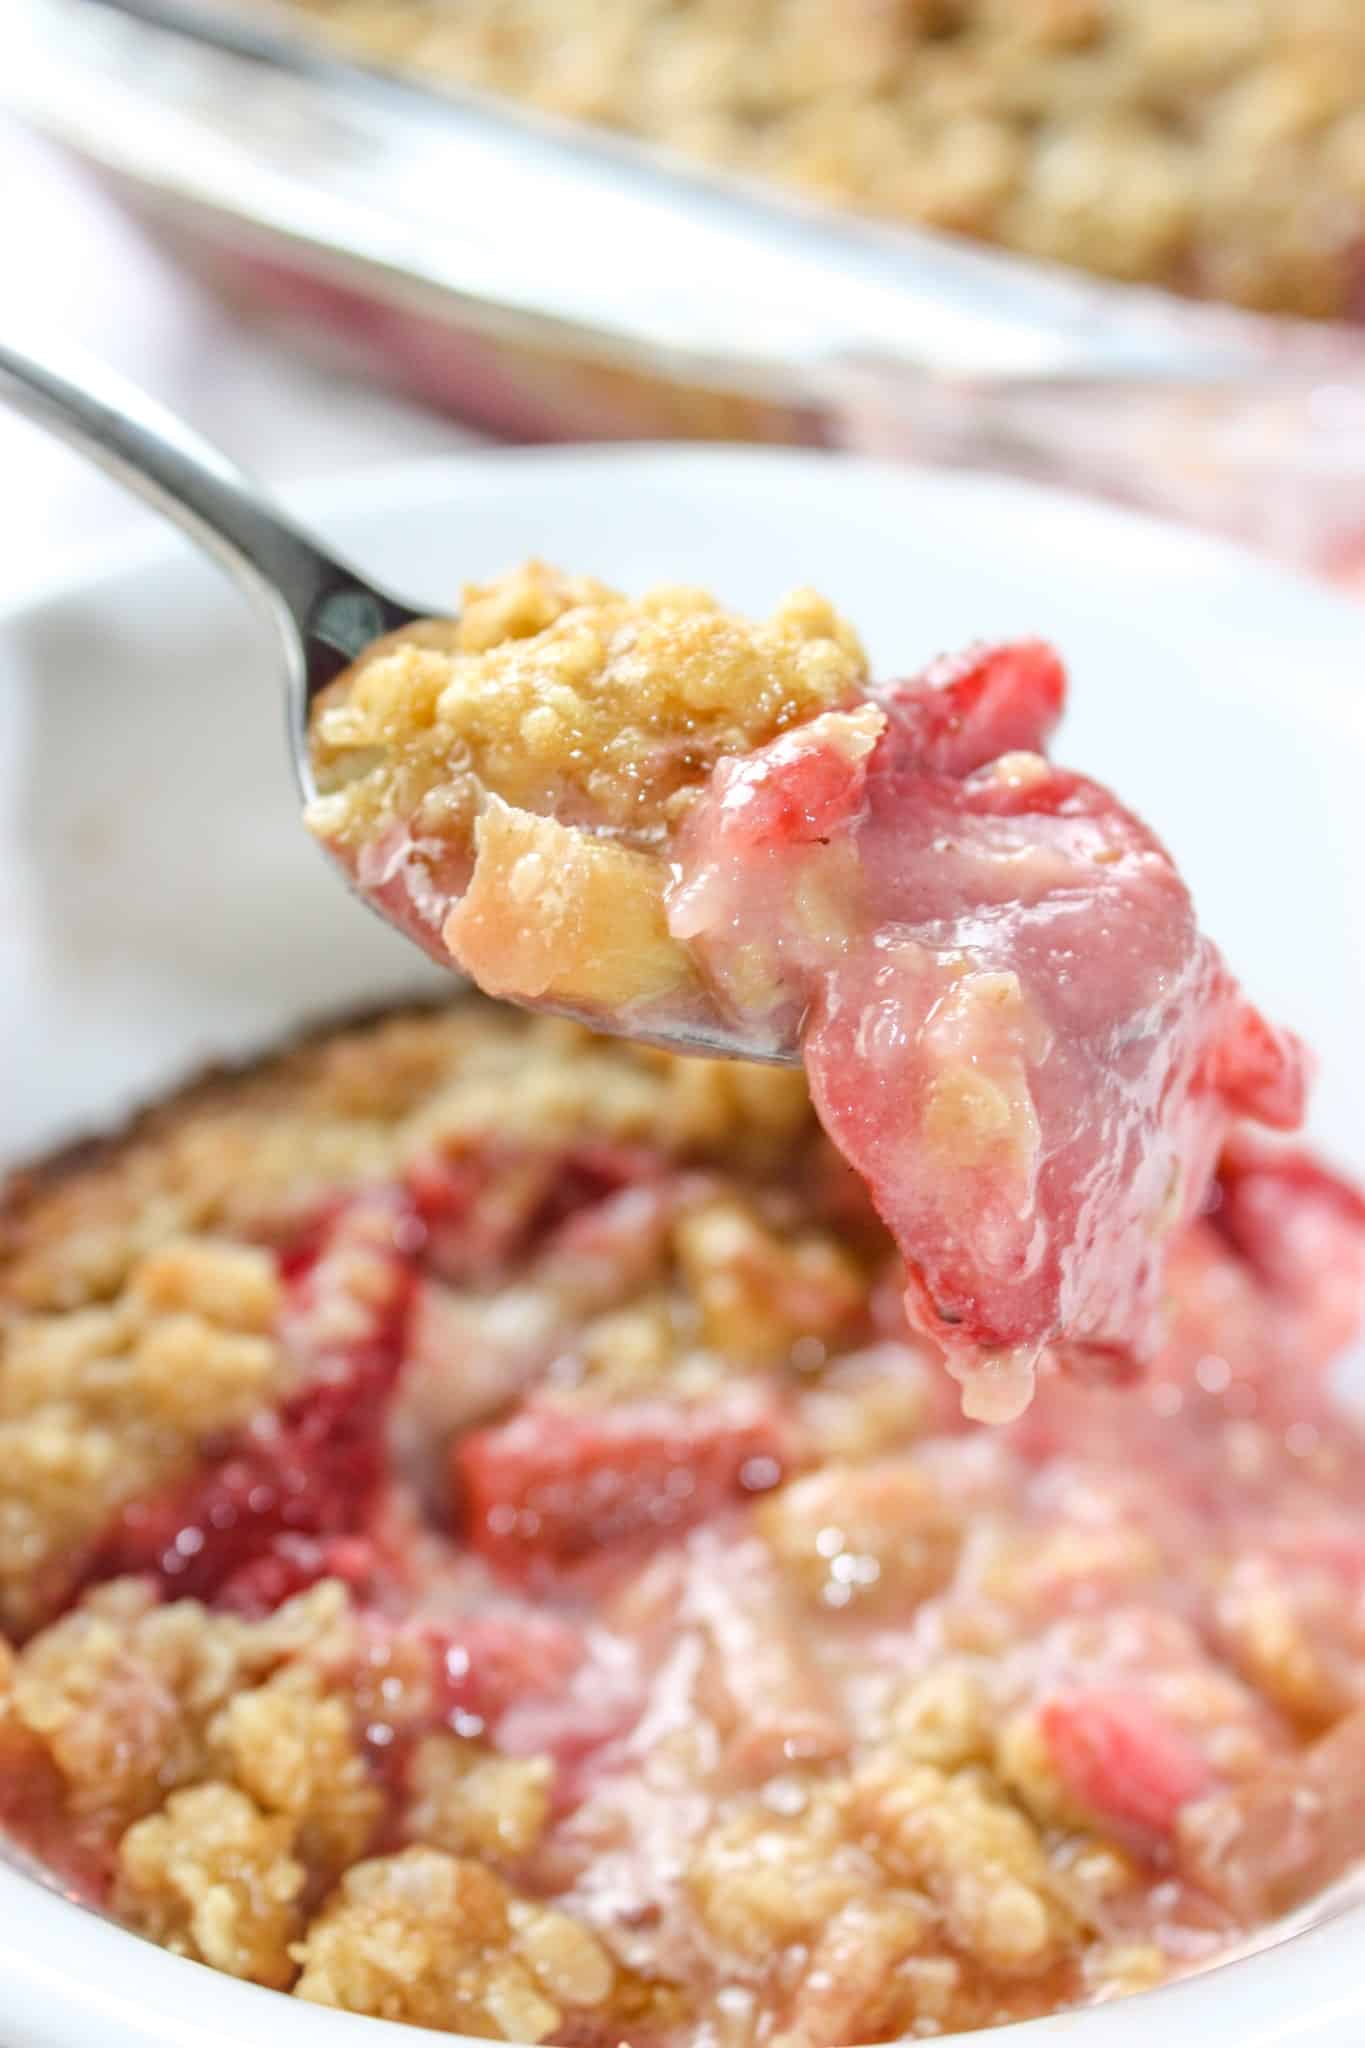 Gluten Free Strawberry Rhubarb Crisp is a wonderful blend of flavours and textures.  This seasonal dessert will delight the taste buds of young and old alike.